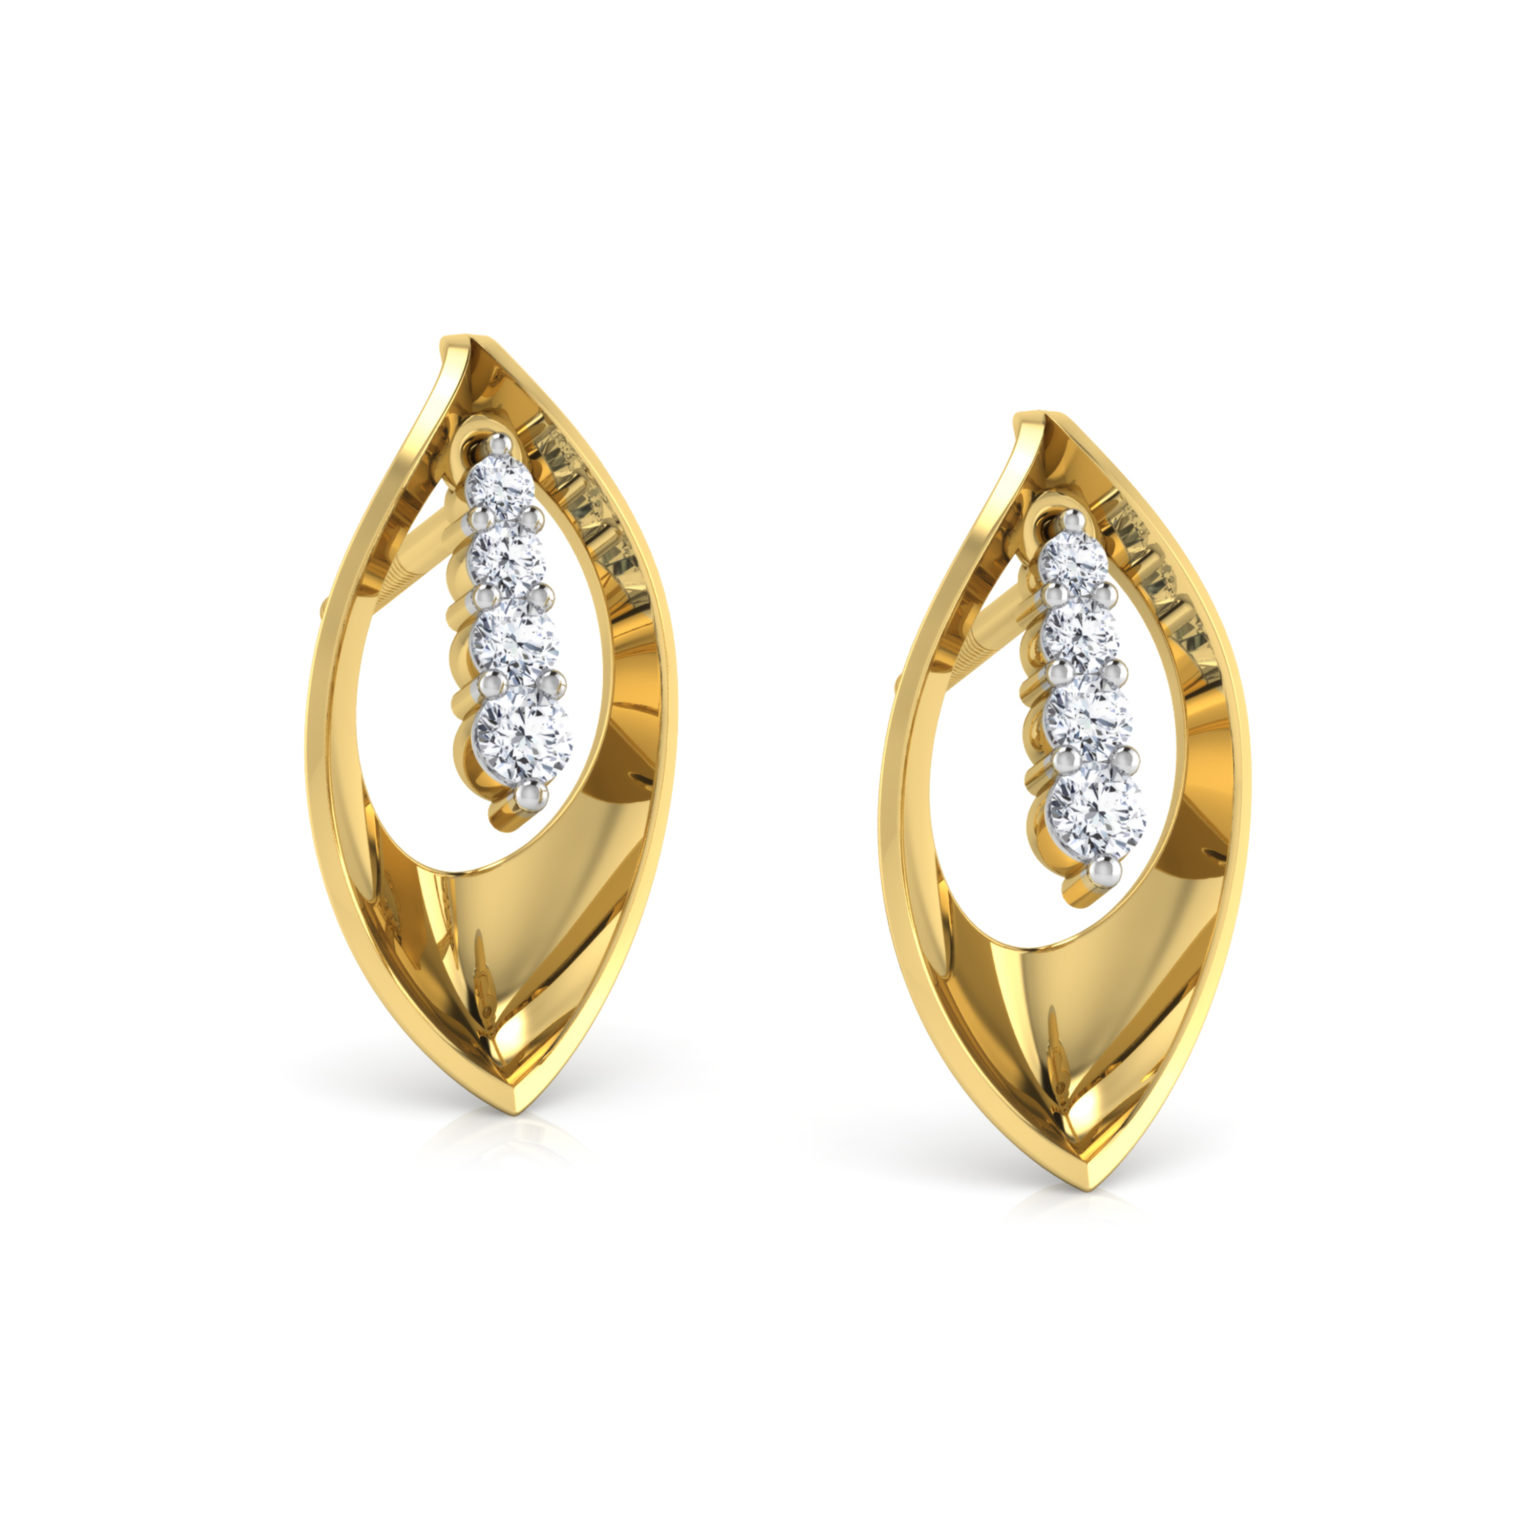 Mellow Earring Collection – 18 KT – RMDG ADER – 529